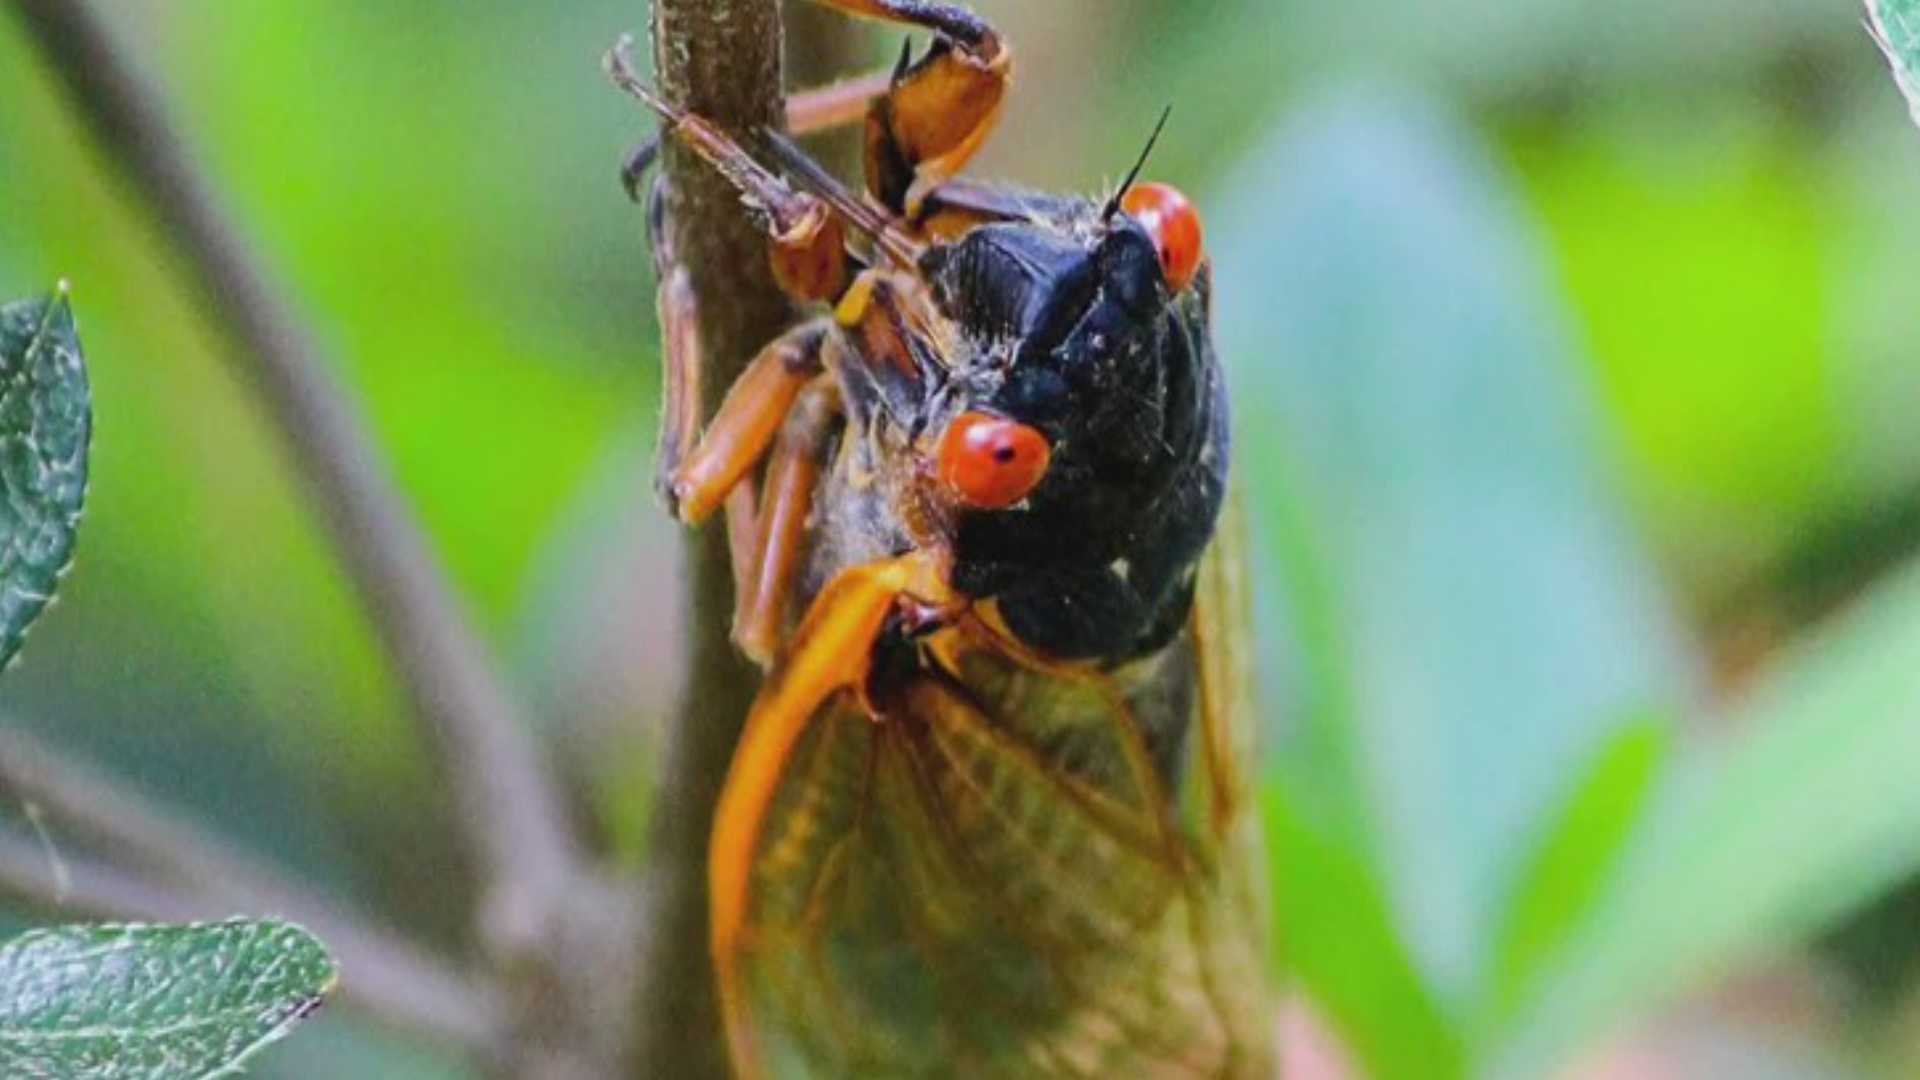 According to people who have tasted them, cicadas taste like shrimp. Experts say that could mean bad news for people with seafood allergies.